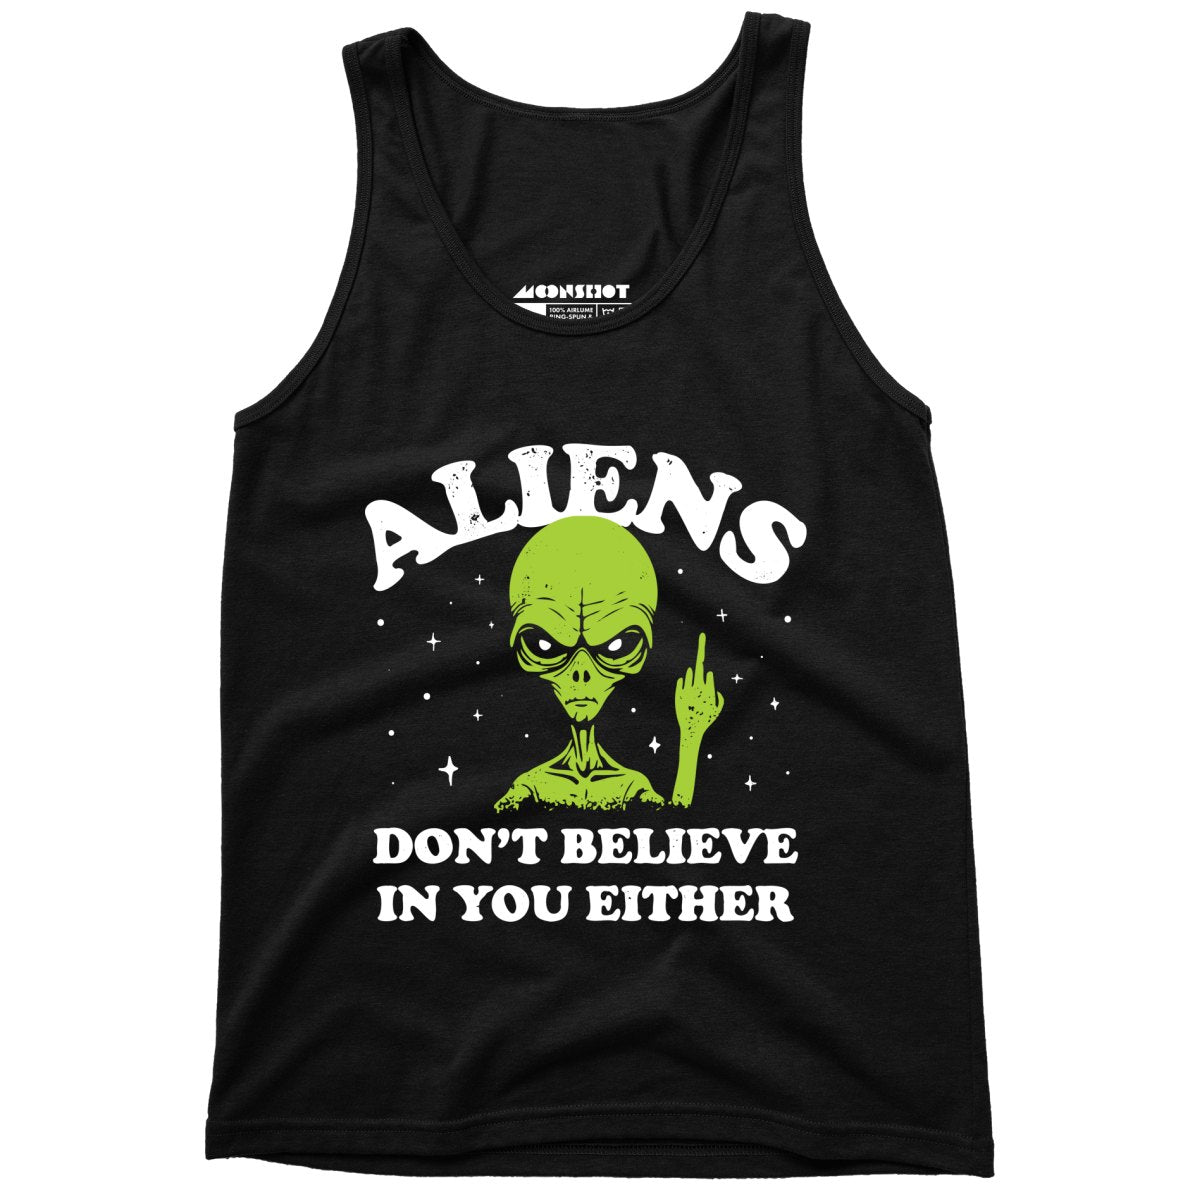 Aliens Don't Believe in You Either - Unisex Tank Top